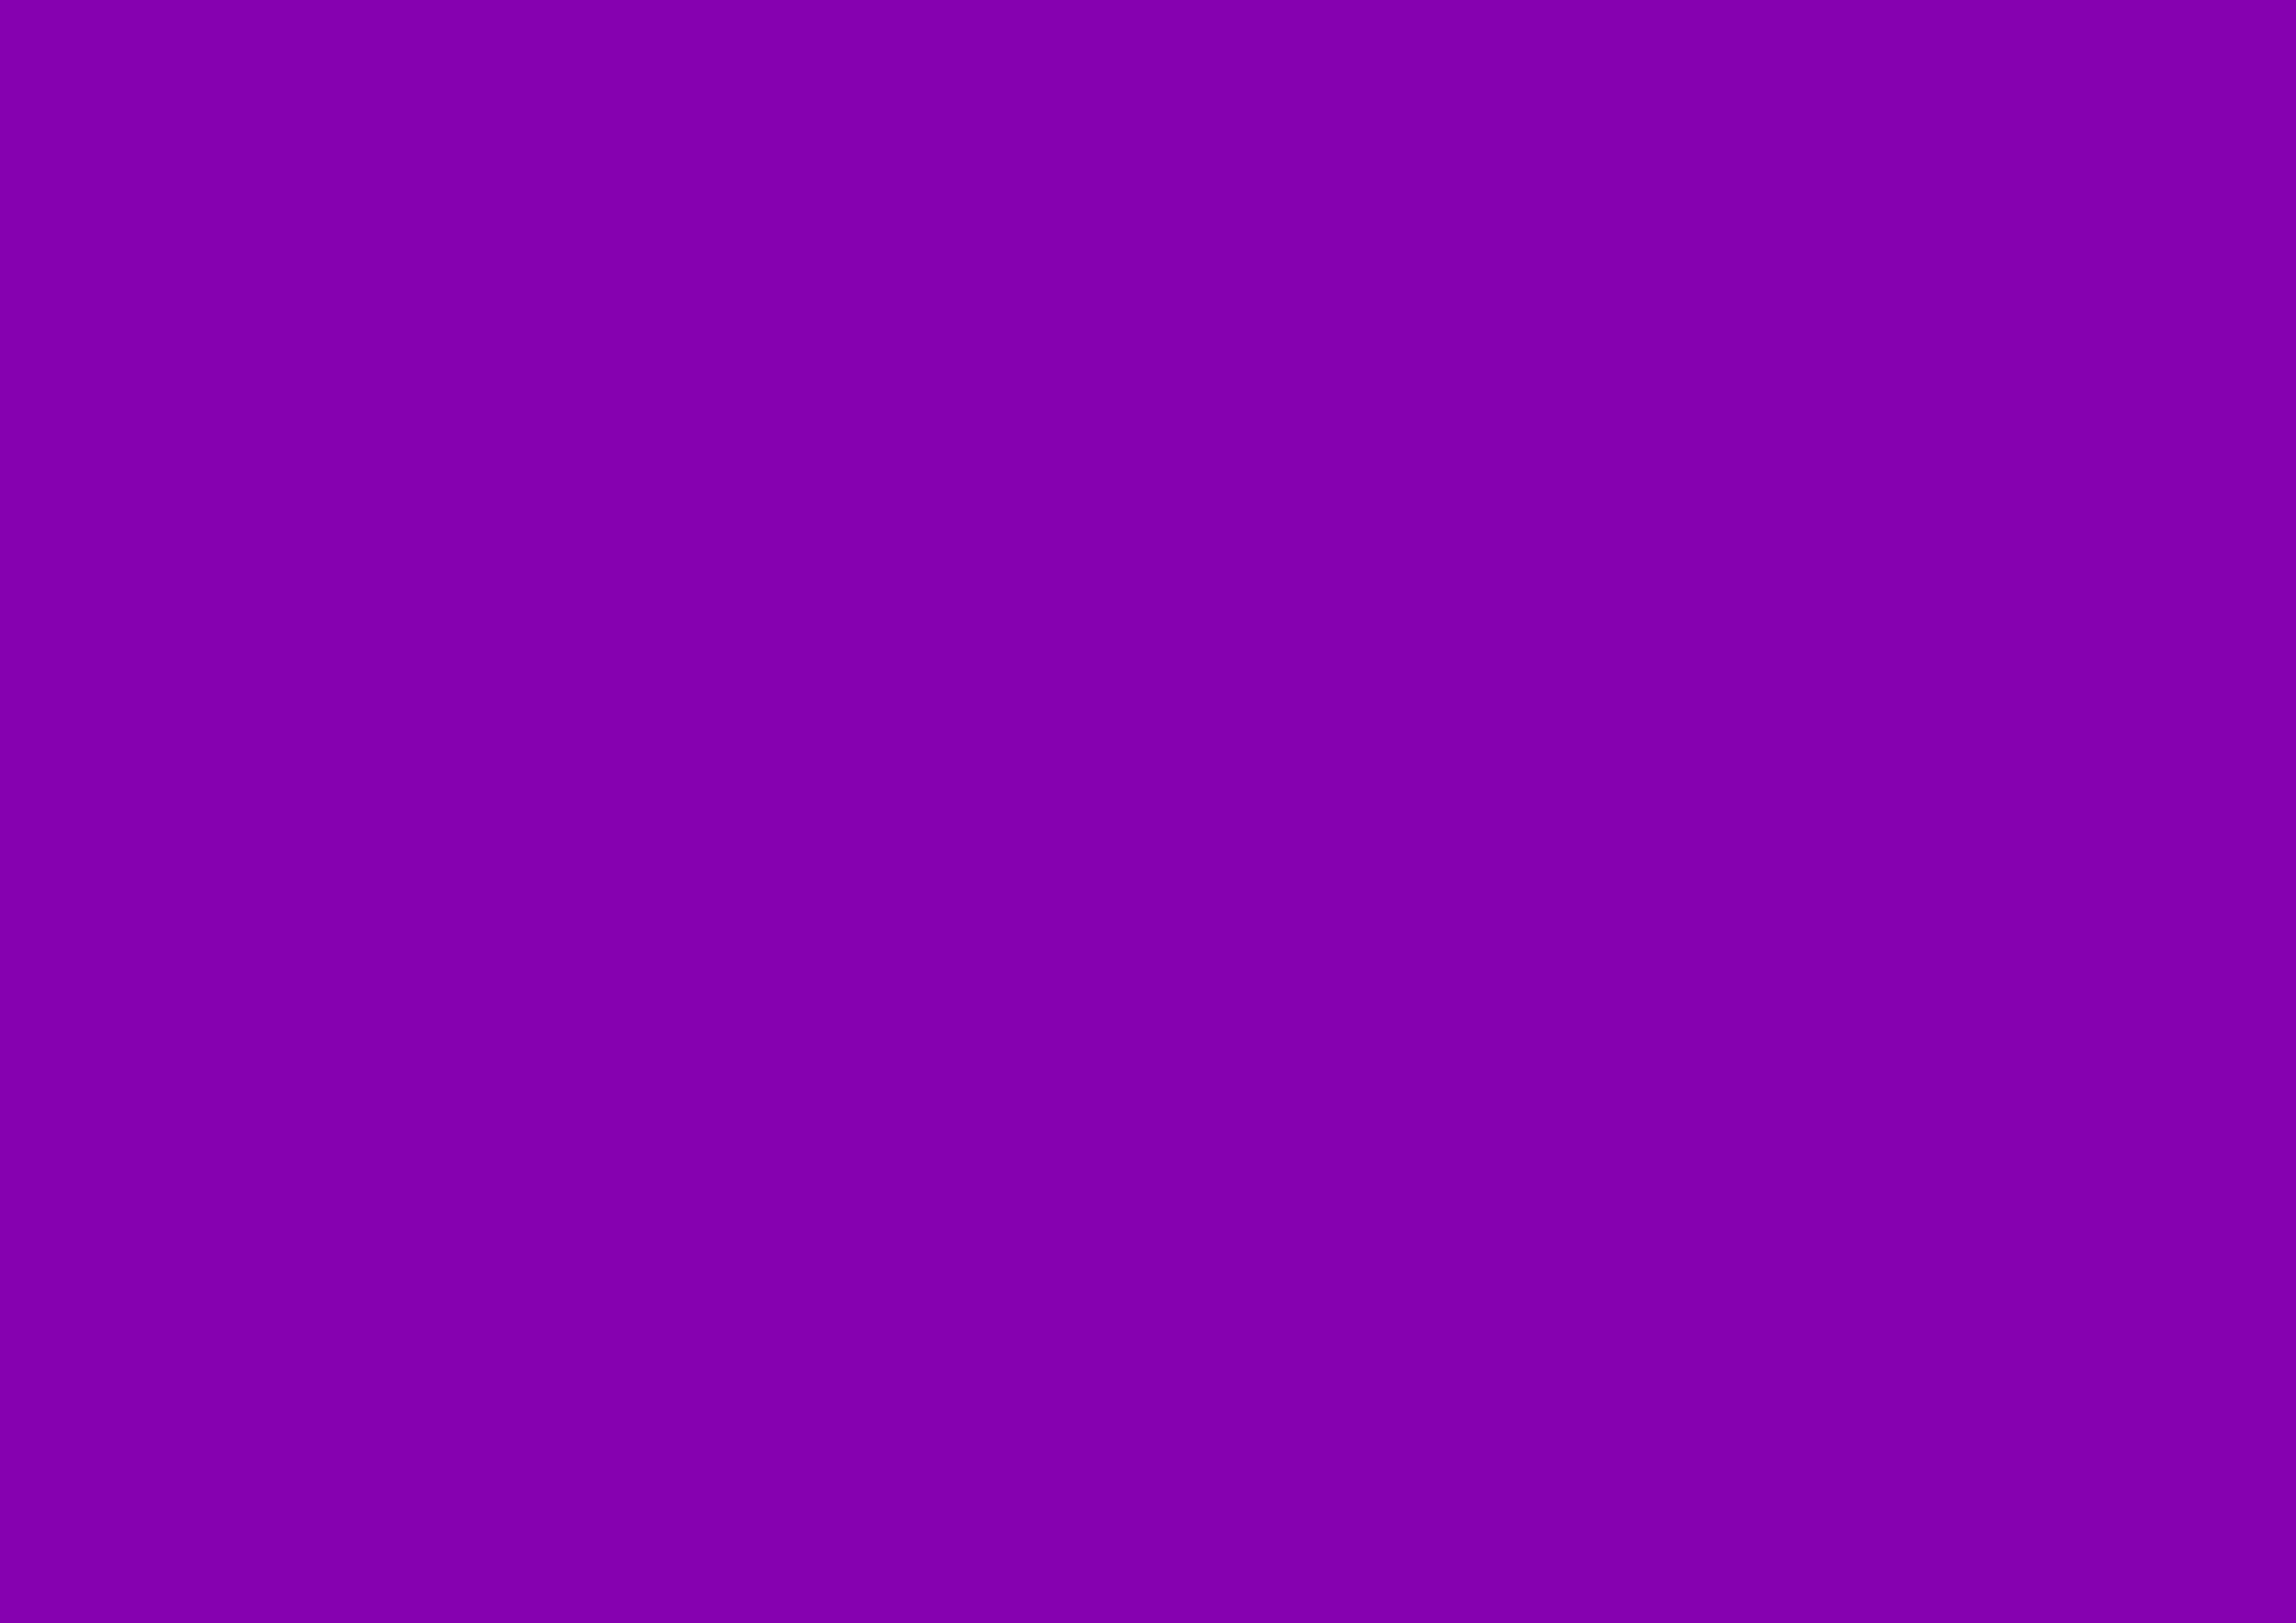 3508x2480 Violet RYB Solid Color Background